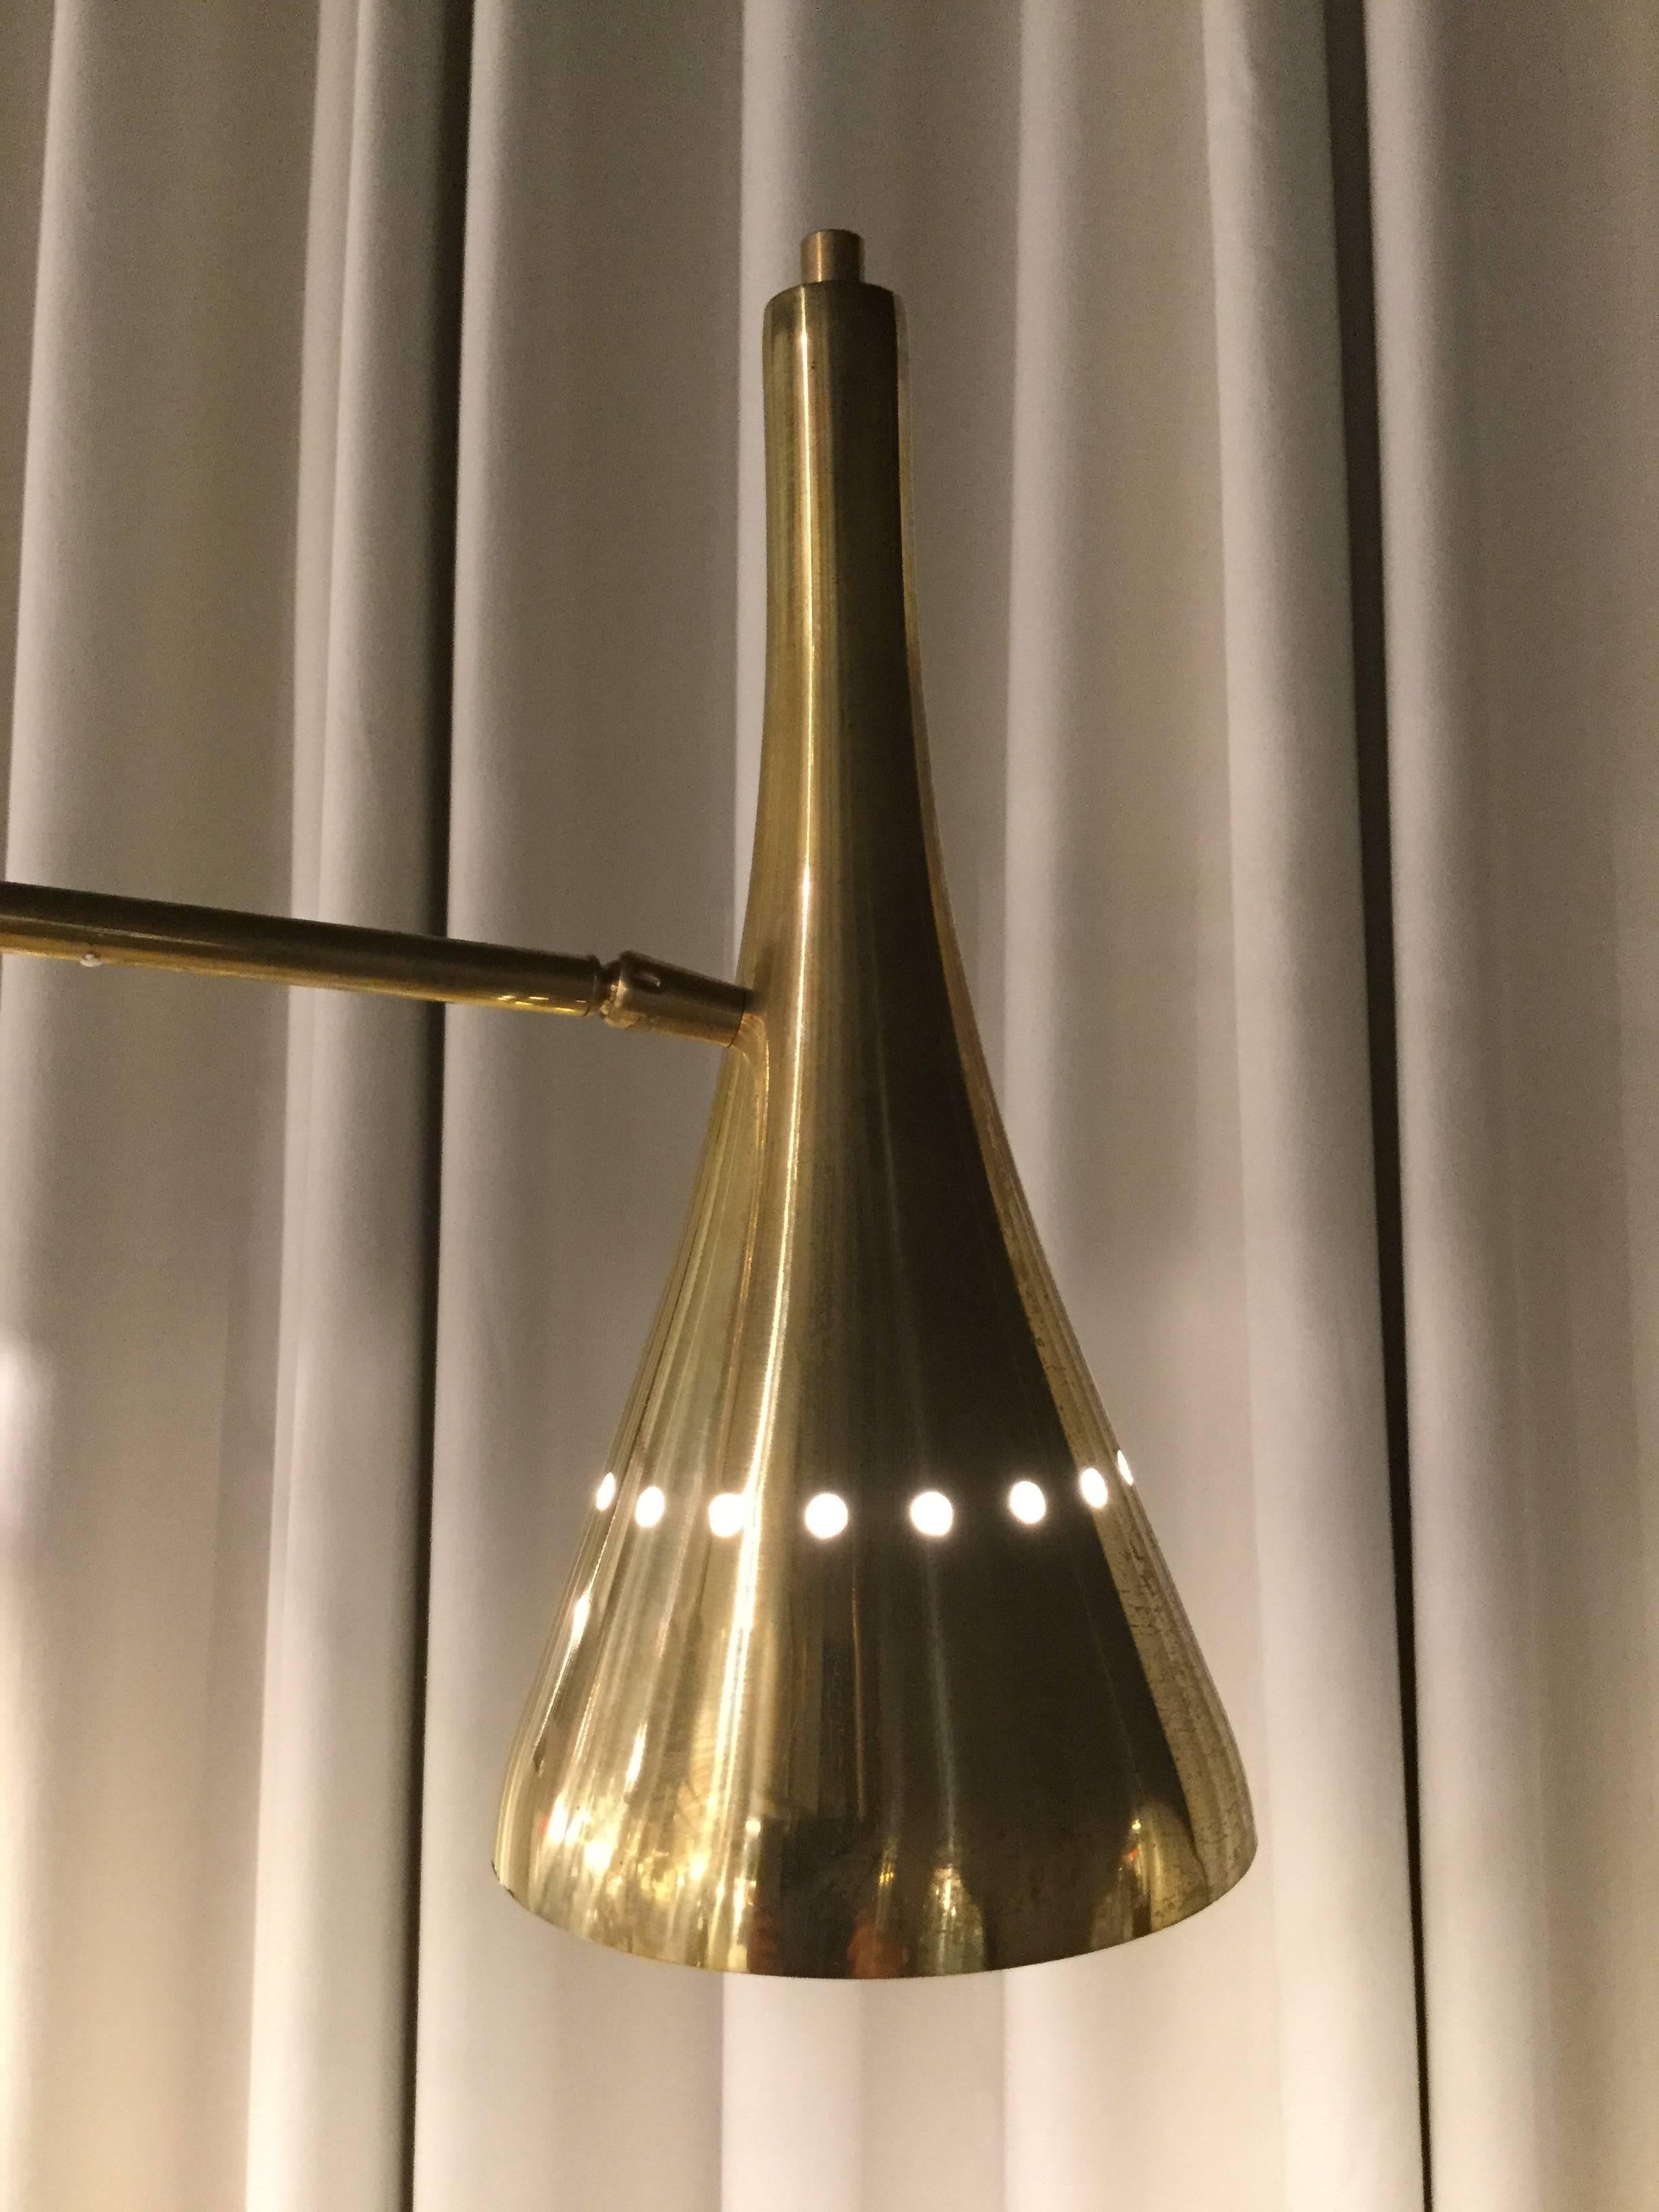 An Italian designed chandelier in brass with six arms with directional shades.